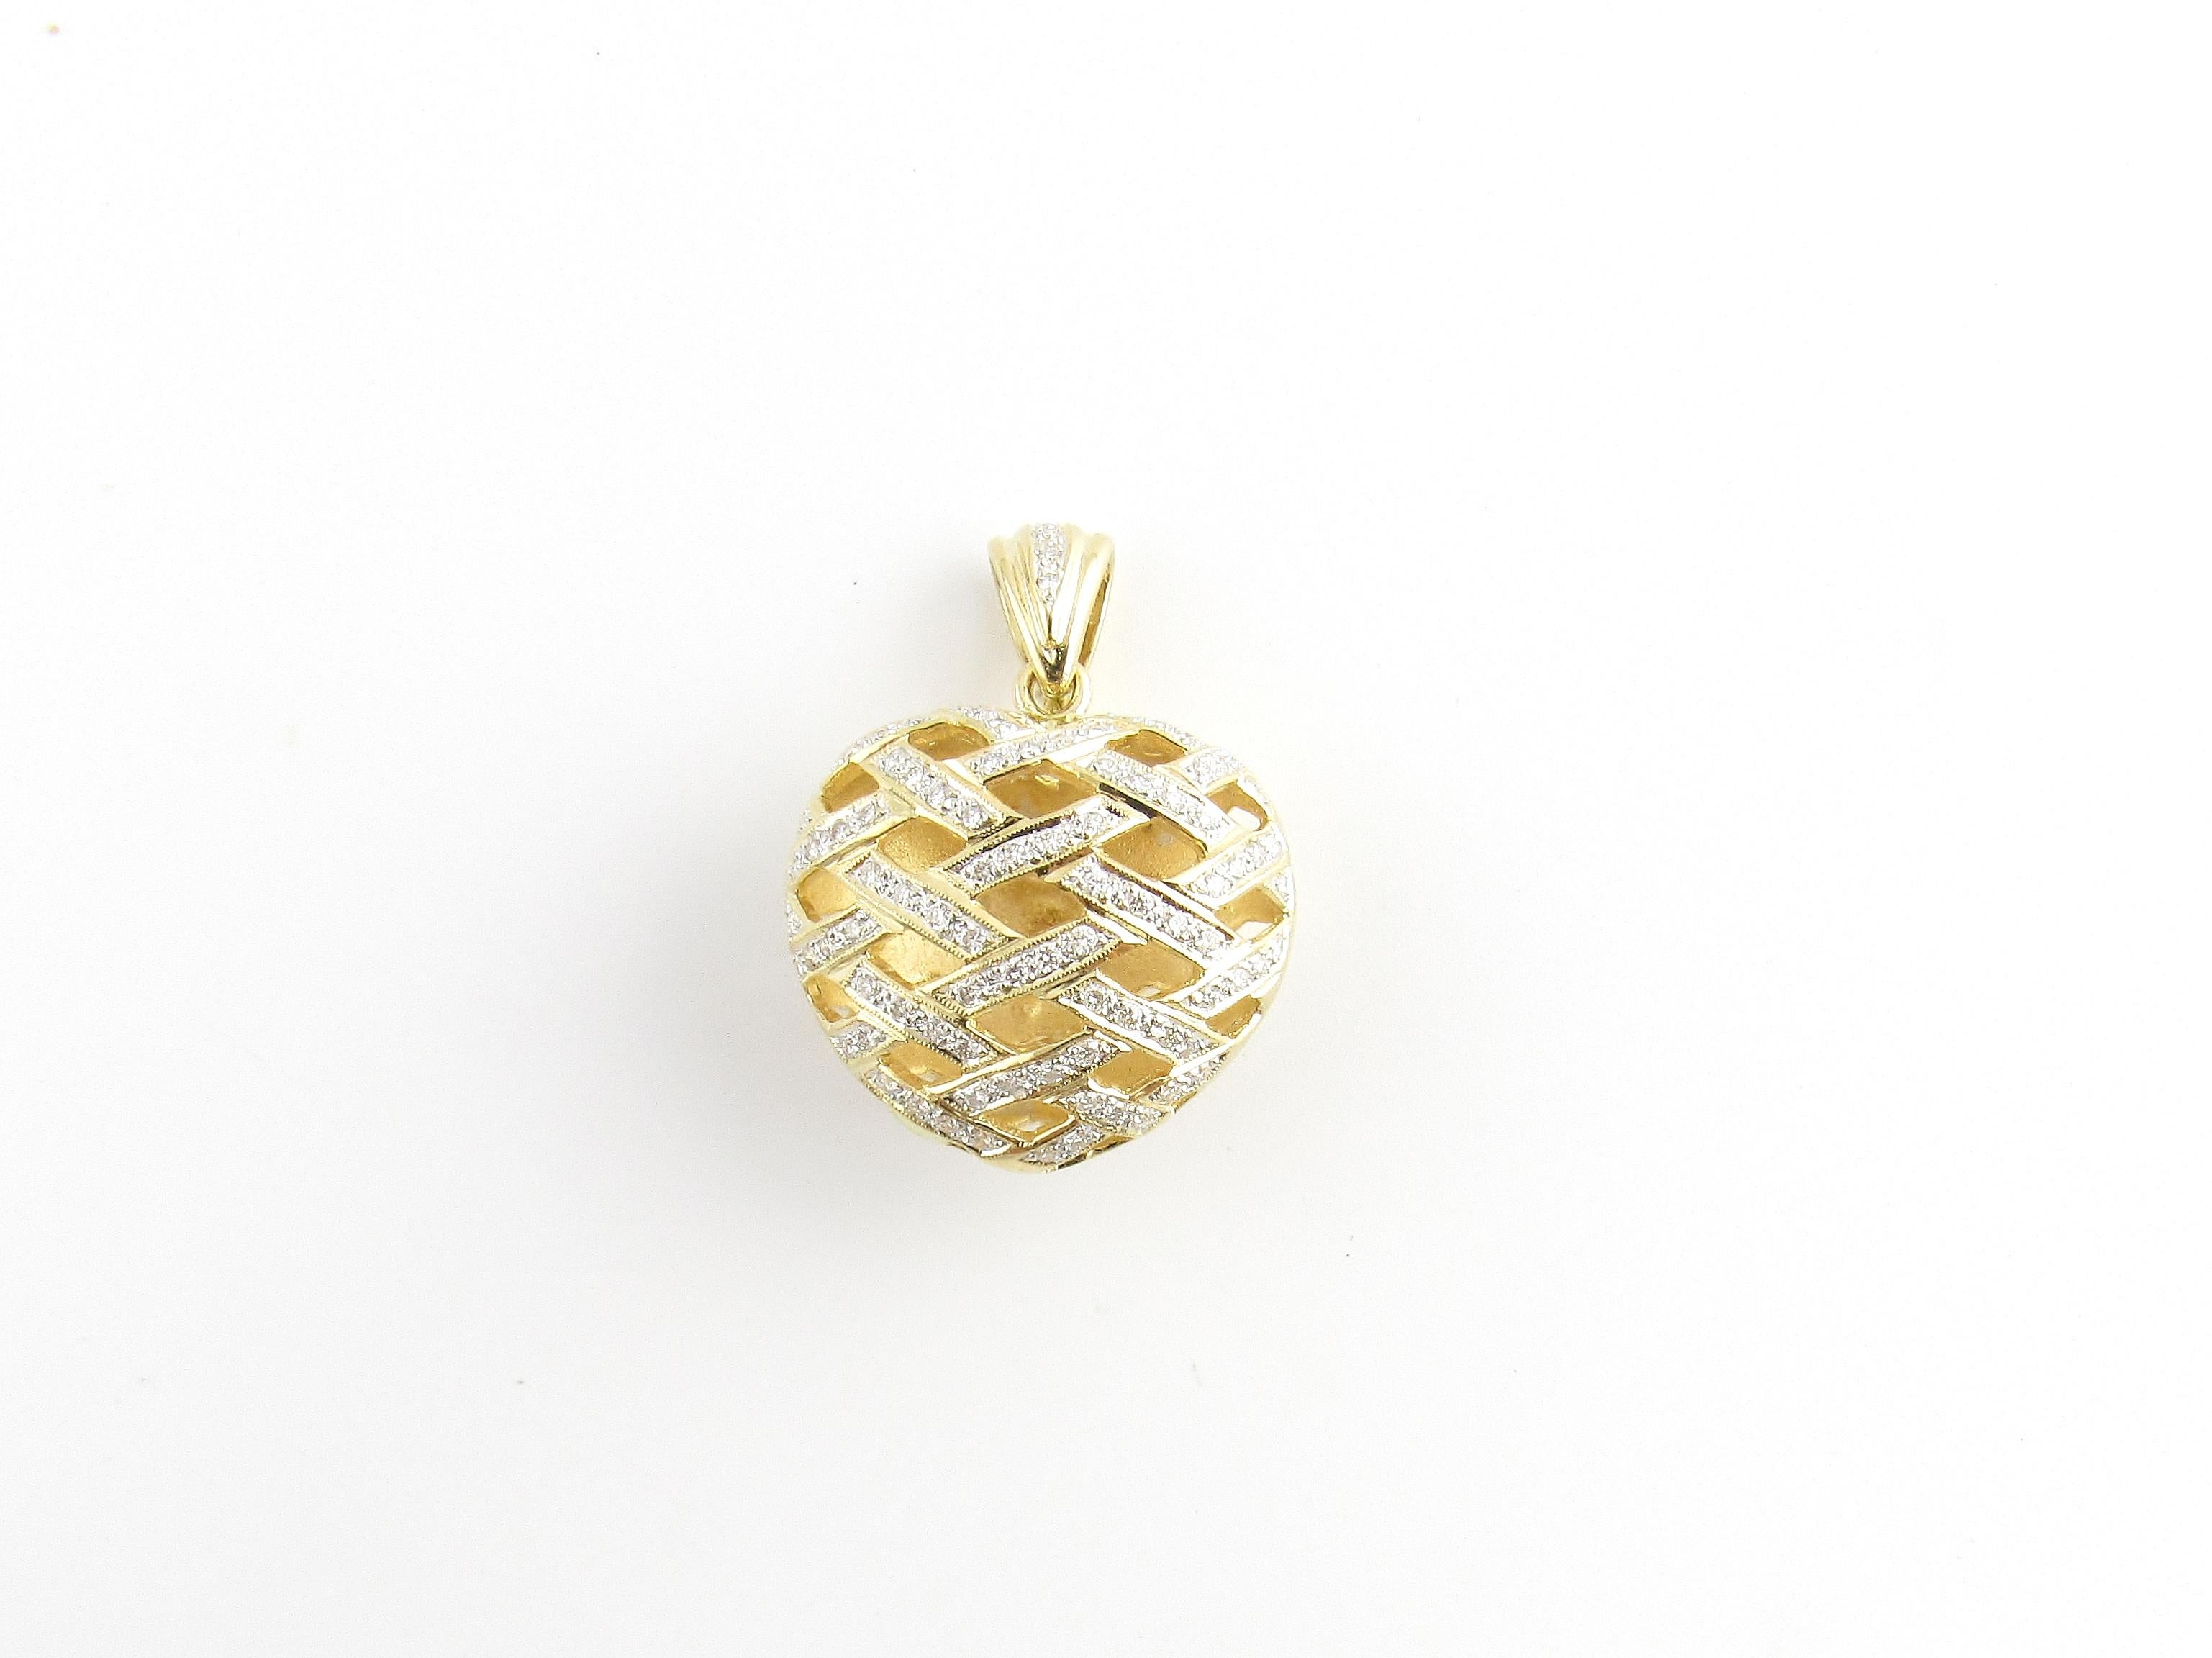 Vintage 18 Karat Yellow Gold and Diamond Heart Pendant

This stunning puffed heart pendant is decorated with 84 round brilliant cut diamonds set in classic 18K yellow gold.

Approximate total diamond weight: .42 ct.

Diamond color: G. Diamond